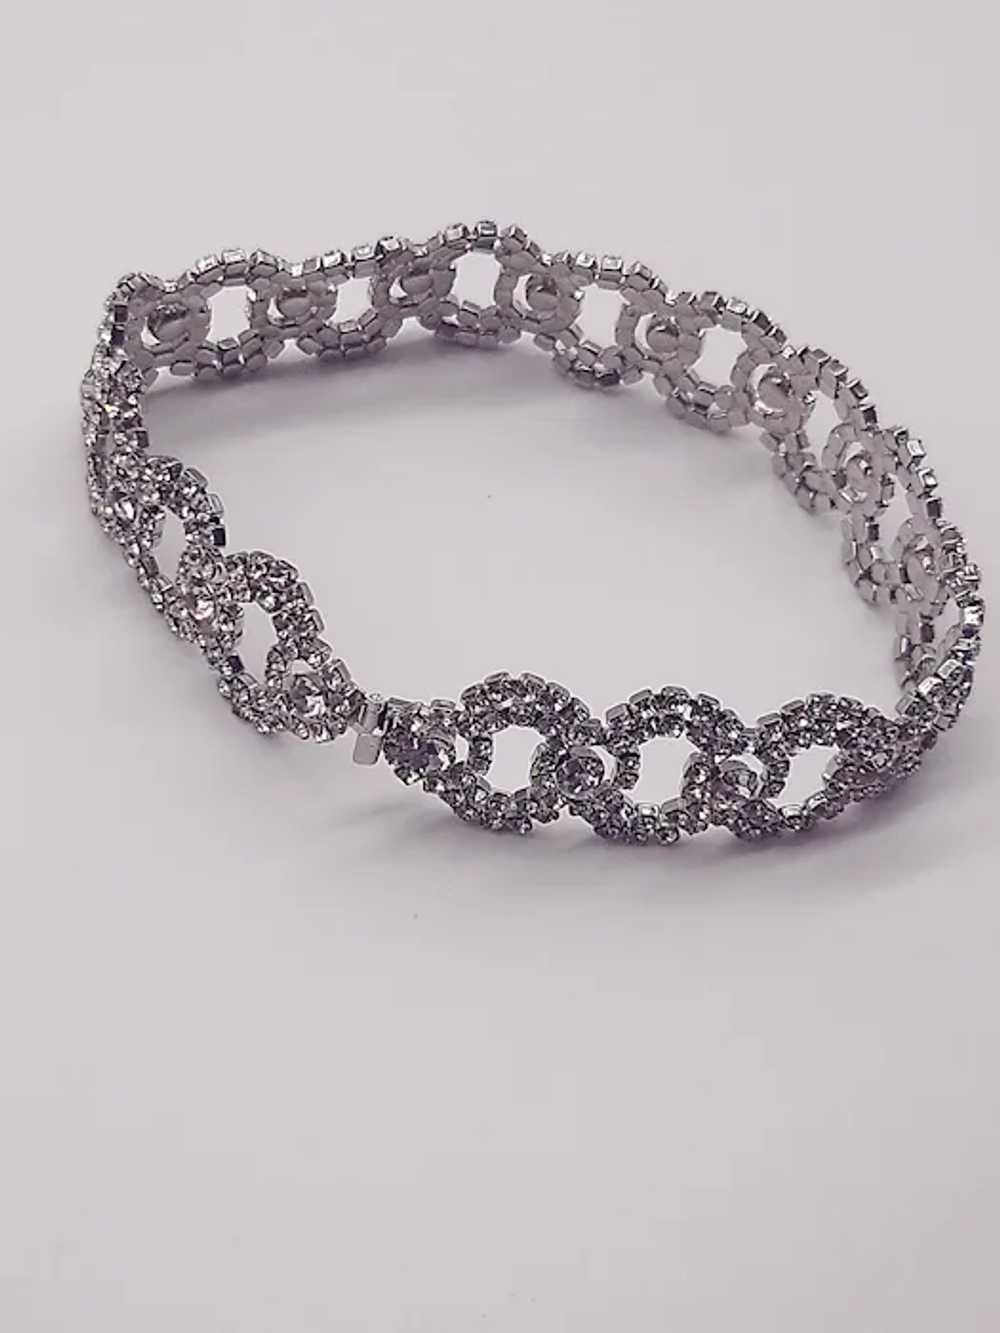 Vintage clear silver tone chocker necklace - image 4